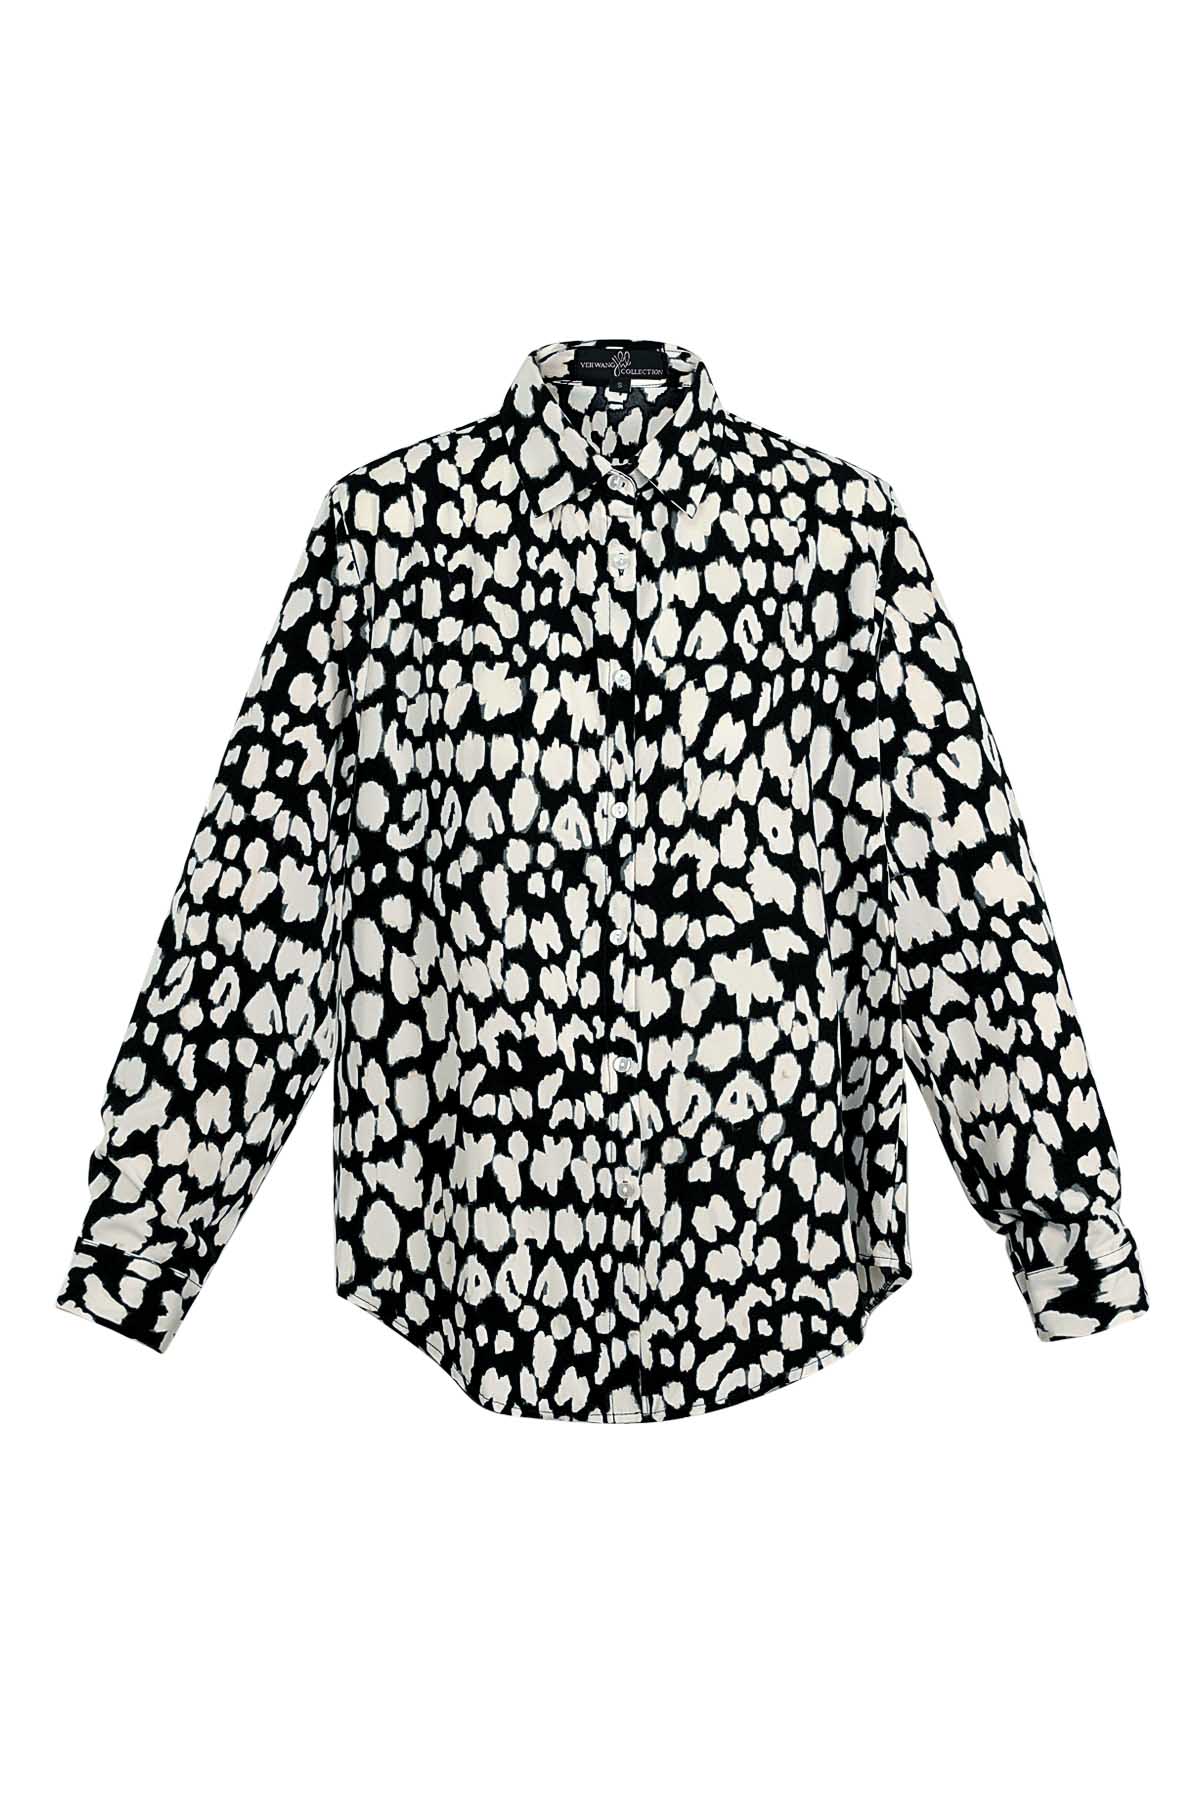 Leopard print blouse black and white h5 